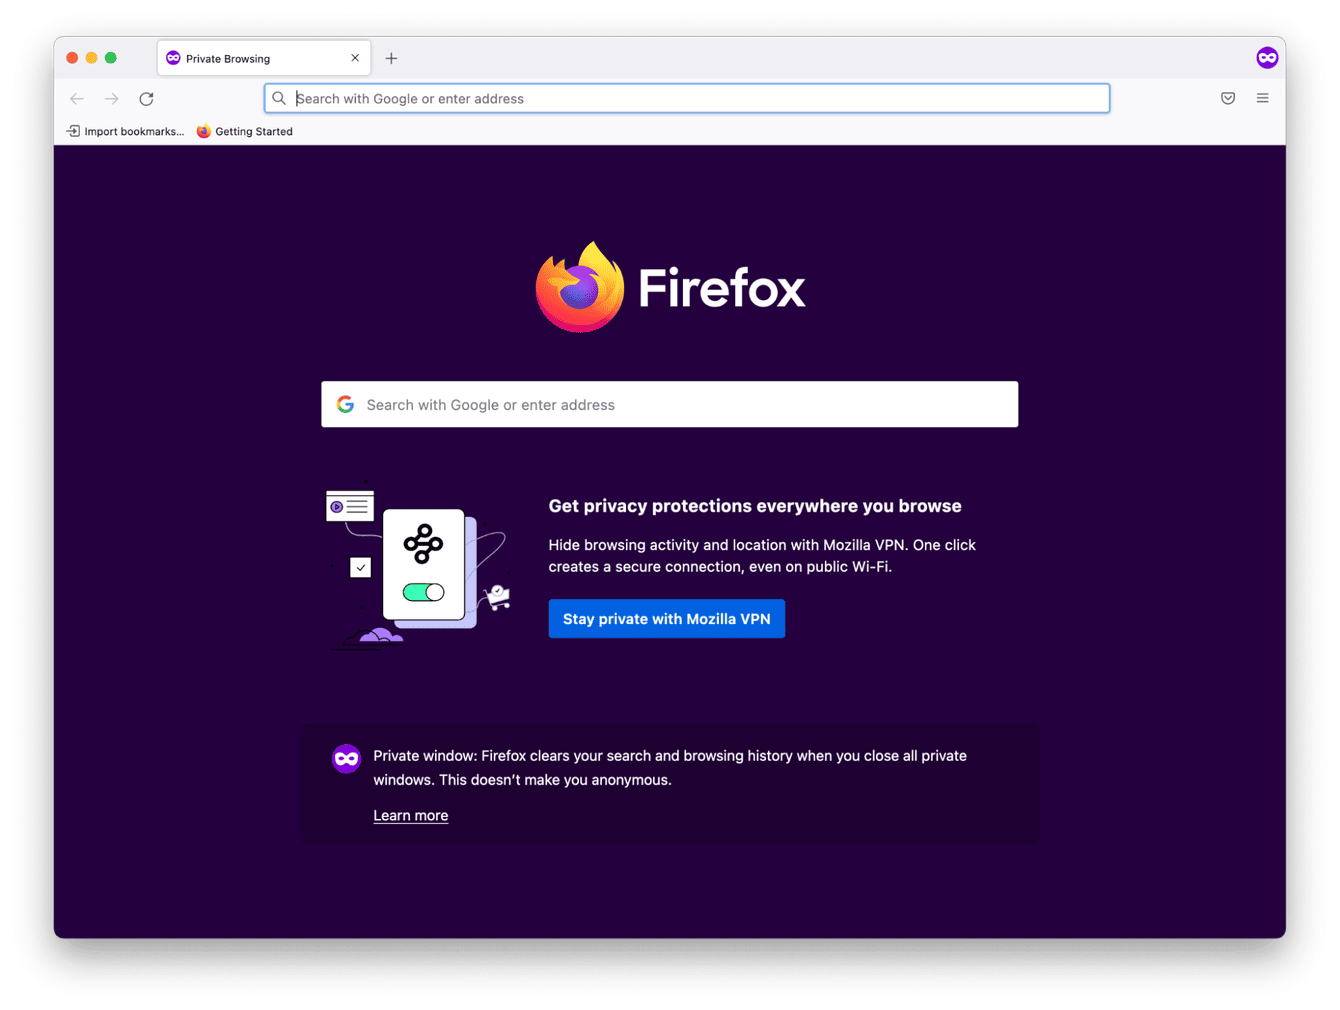 Private browsing in Firefox